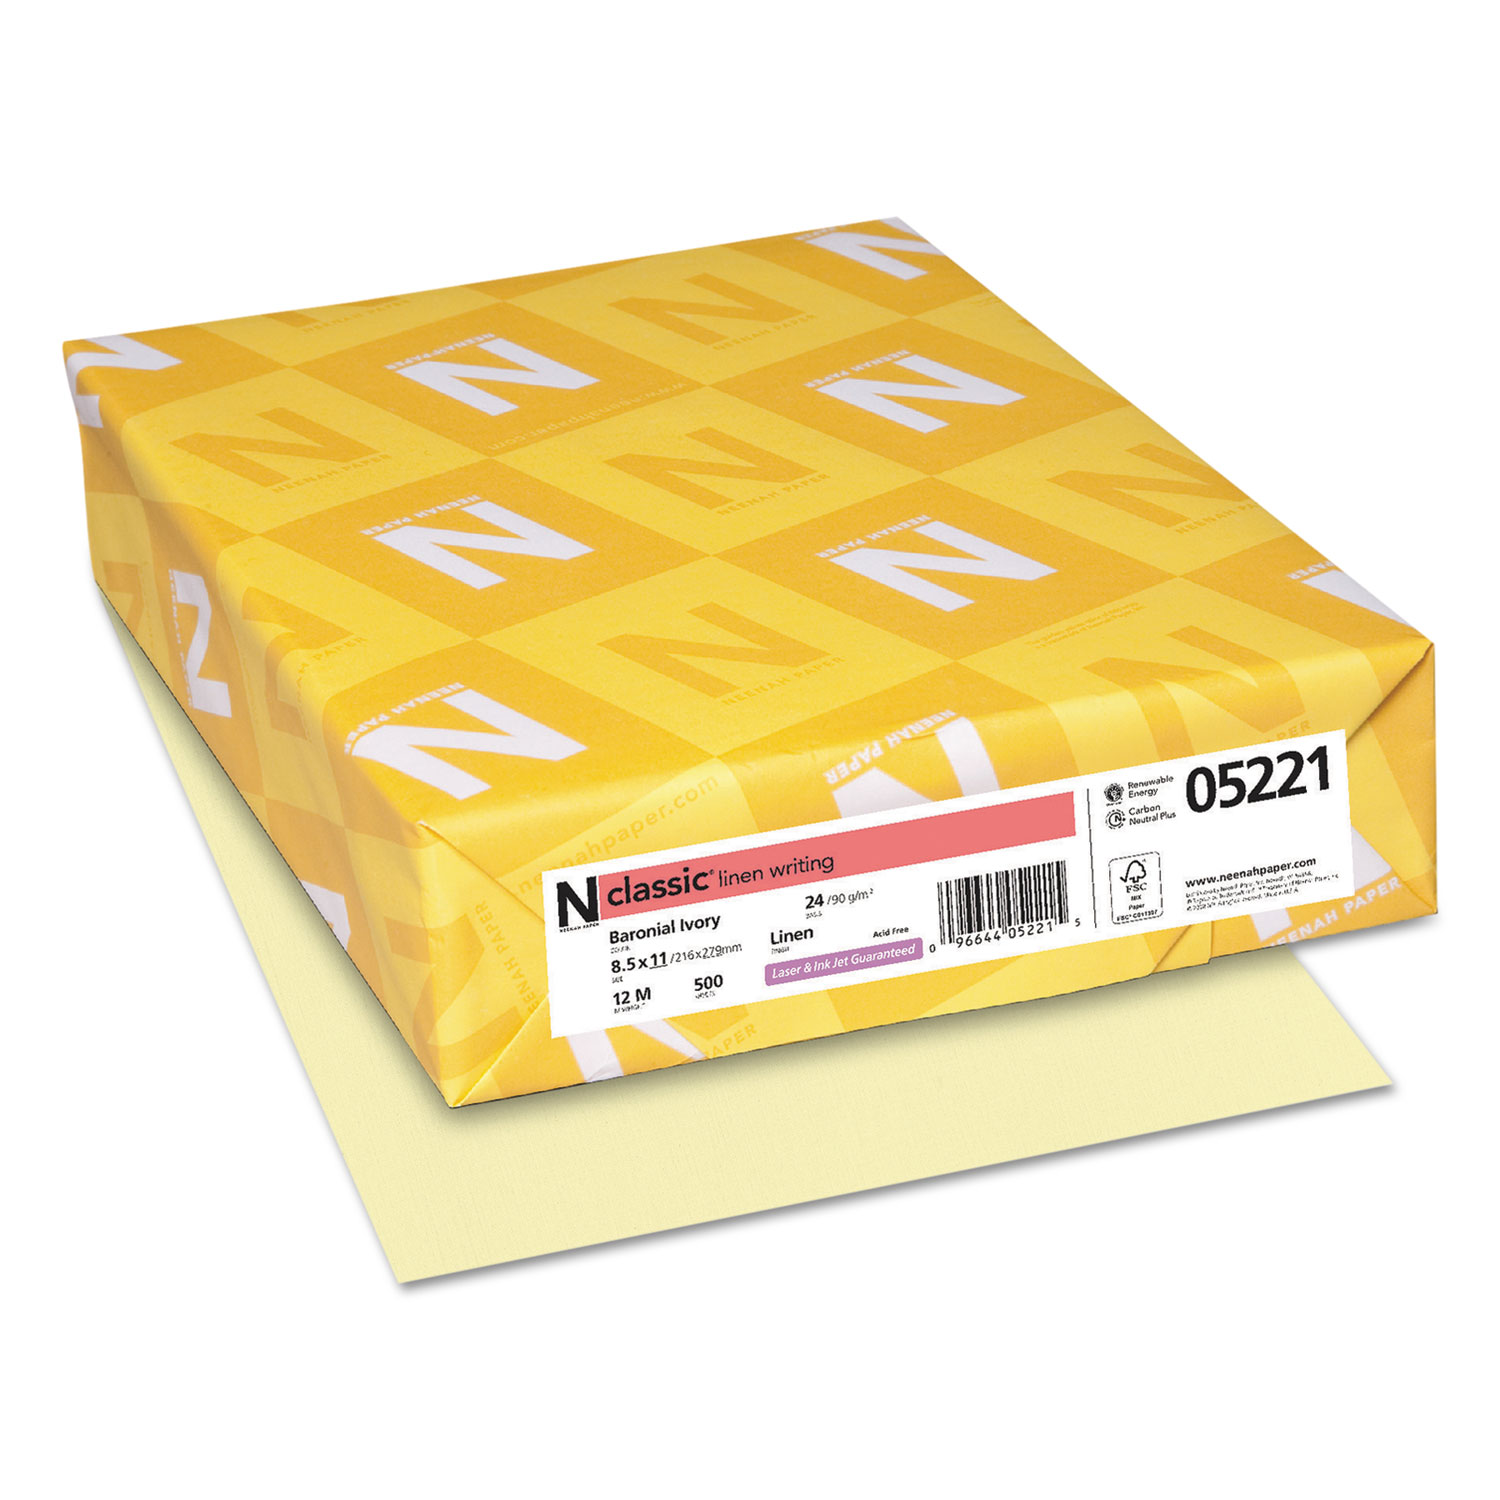  Neenah Paper 05221 CLASSIC Linen Stationery, 24 lb, 8.5 x 11, Baronial Ivory, 500/Ream (NEE05221) 